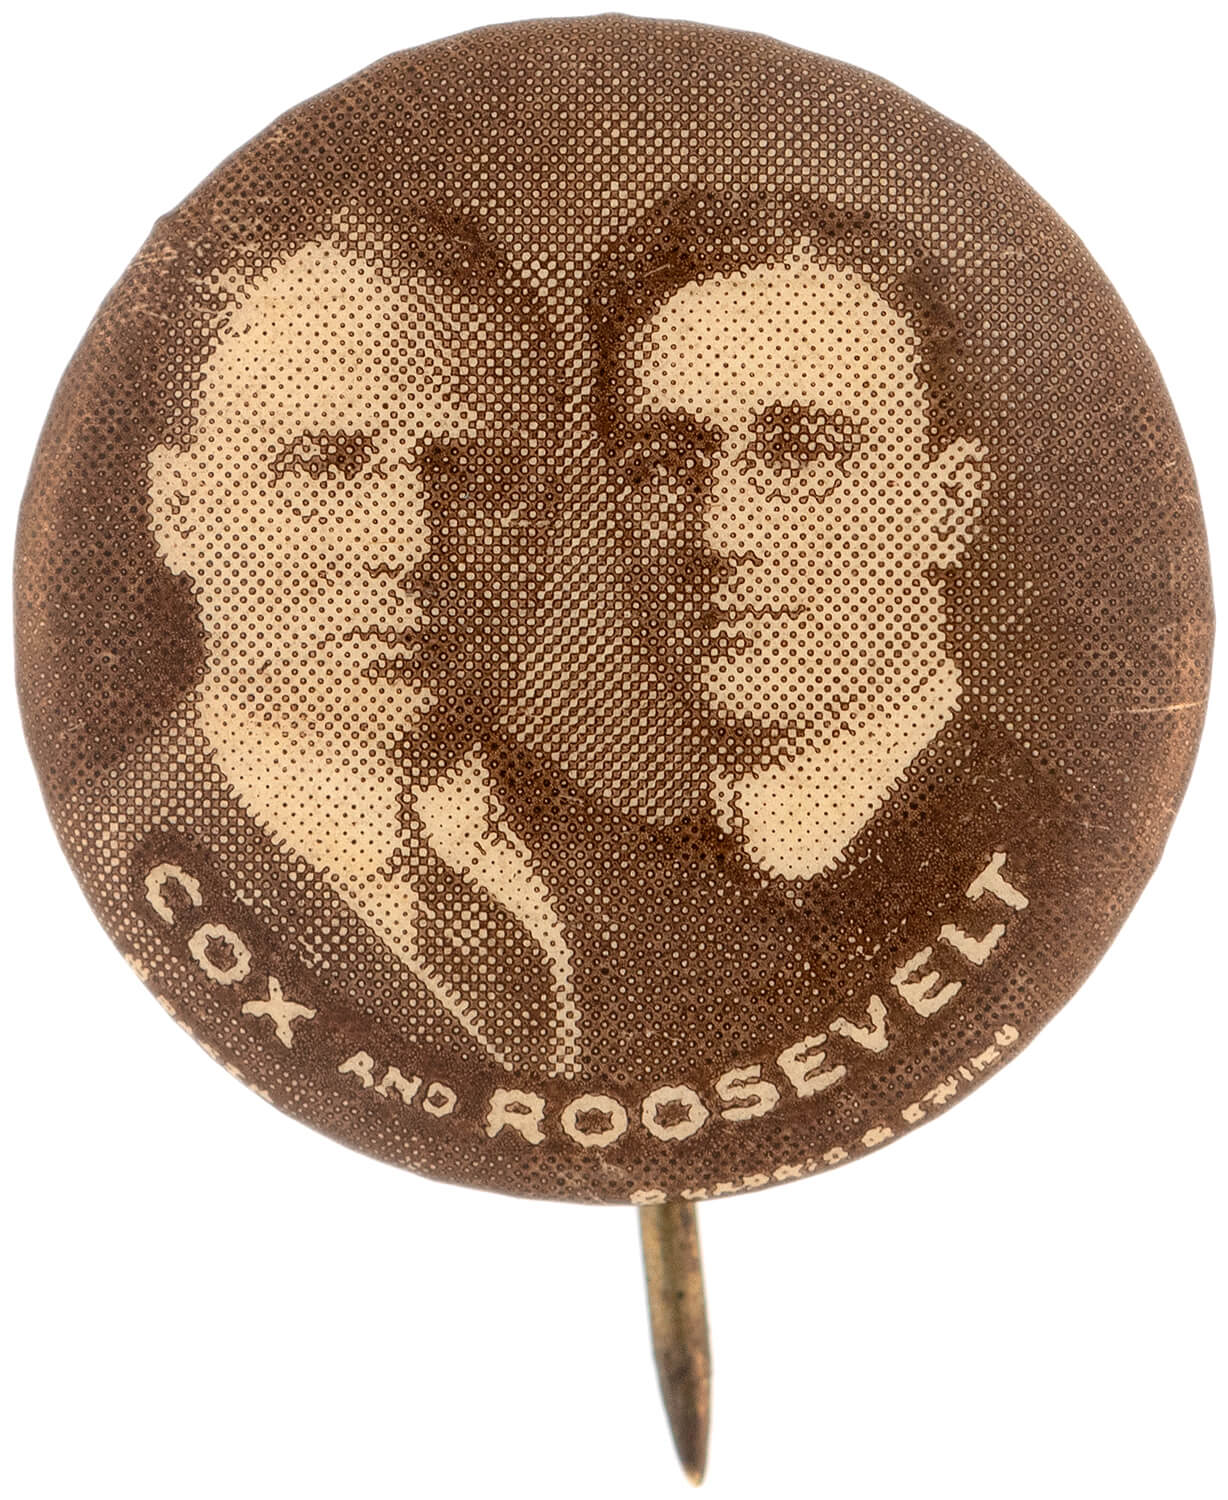 James M. Cox and Franklin Delano Roosevelt jugate button from the US presidential election of 1920. At 5/8in in diameter, it represents the smallest size in which this particular type of pinback was made. Few Cox-Roosevelt buttons exist in any size, and all are believed to have been manufacturer’s samples. Est. $10,000-$20,000. Image courtesy of Hake’s Auctions